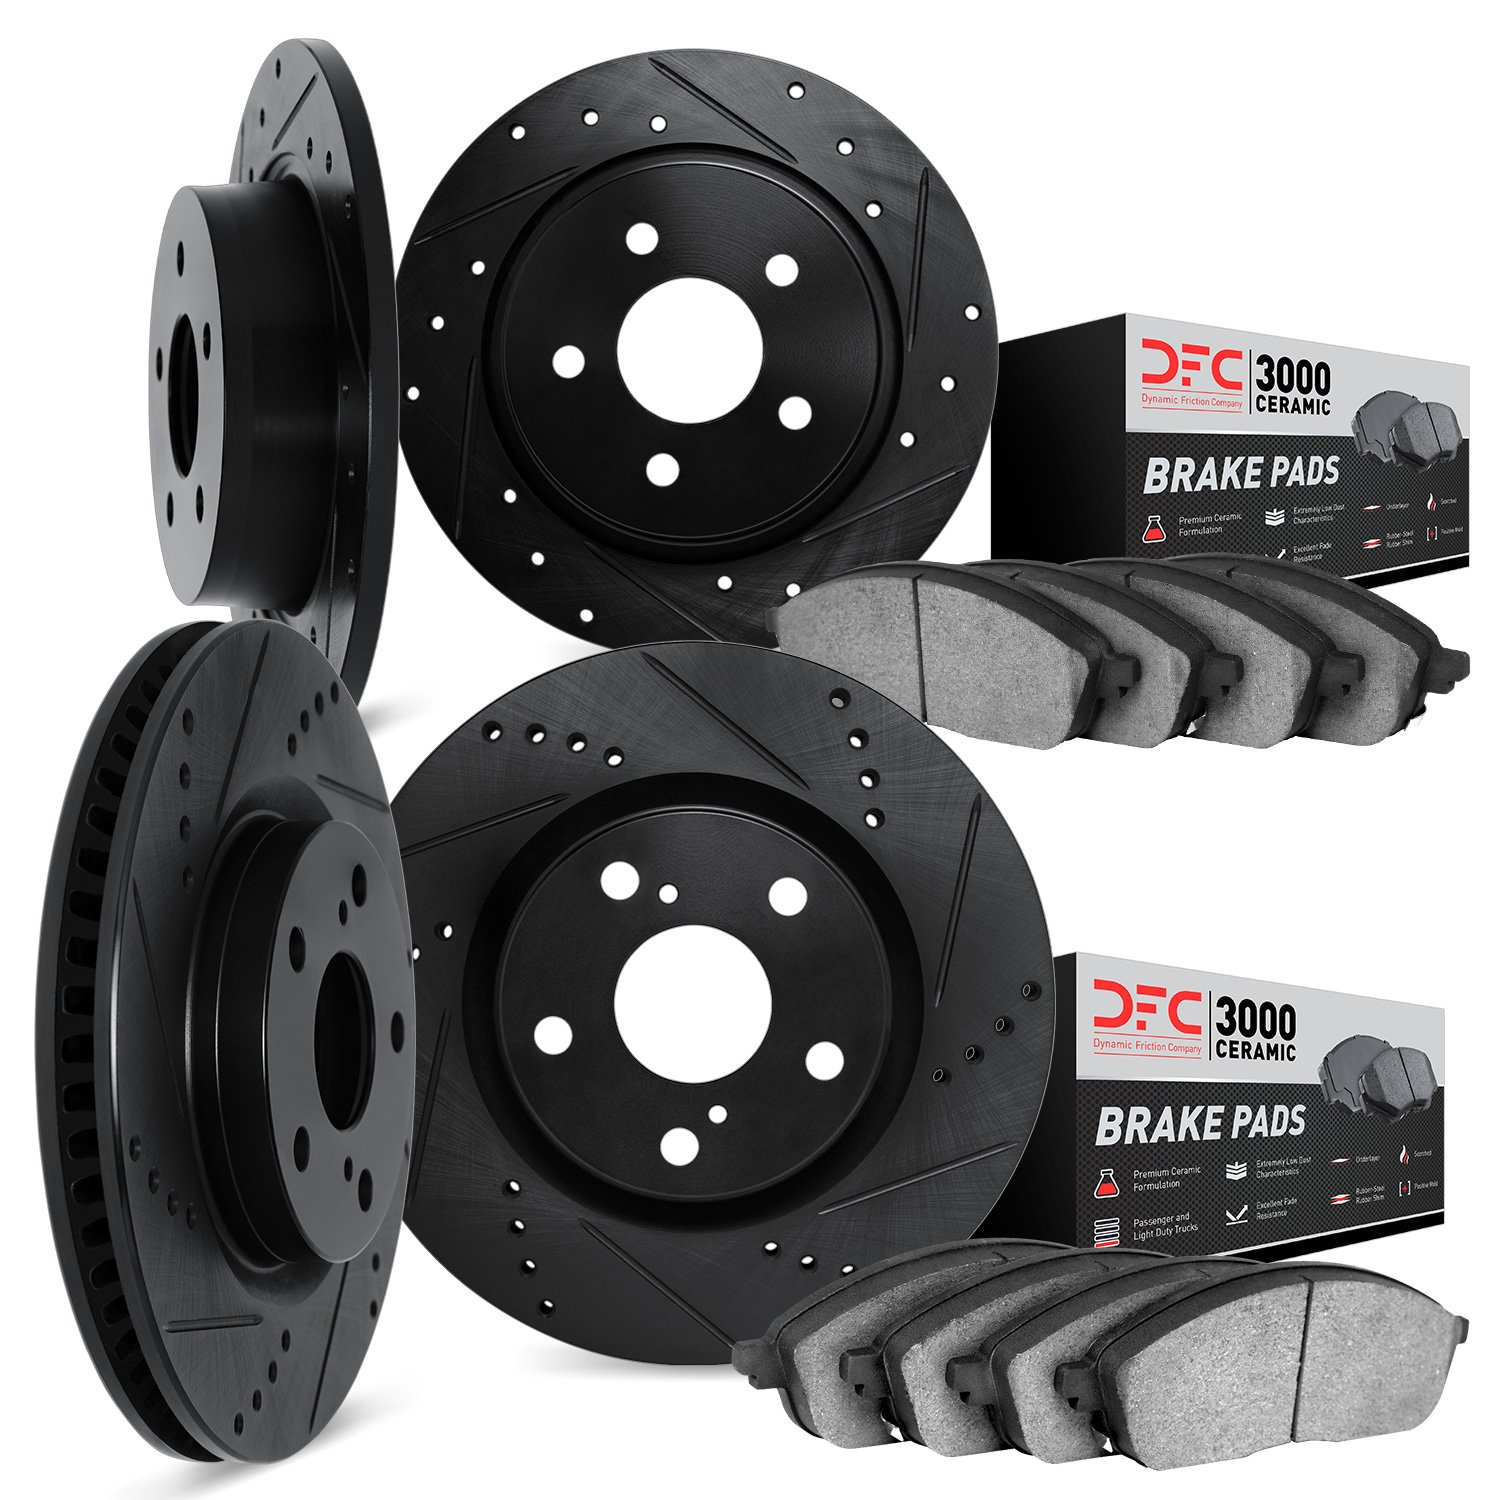 8304-59048 Drilled/Slotted Brake Rotors with 3000-Series Ceramic Brake Pads Kit [Black], 2009-2011 Acura/Honda, Position: Front